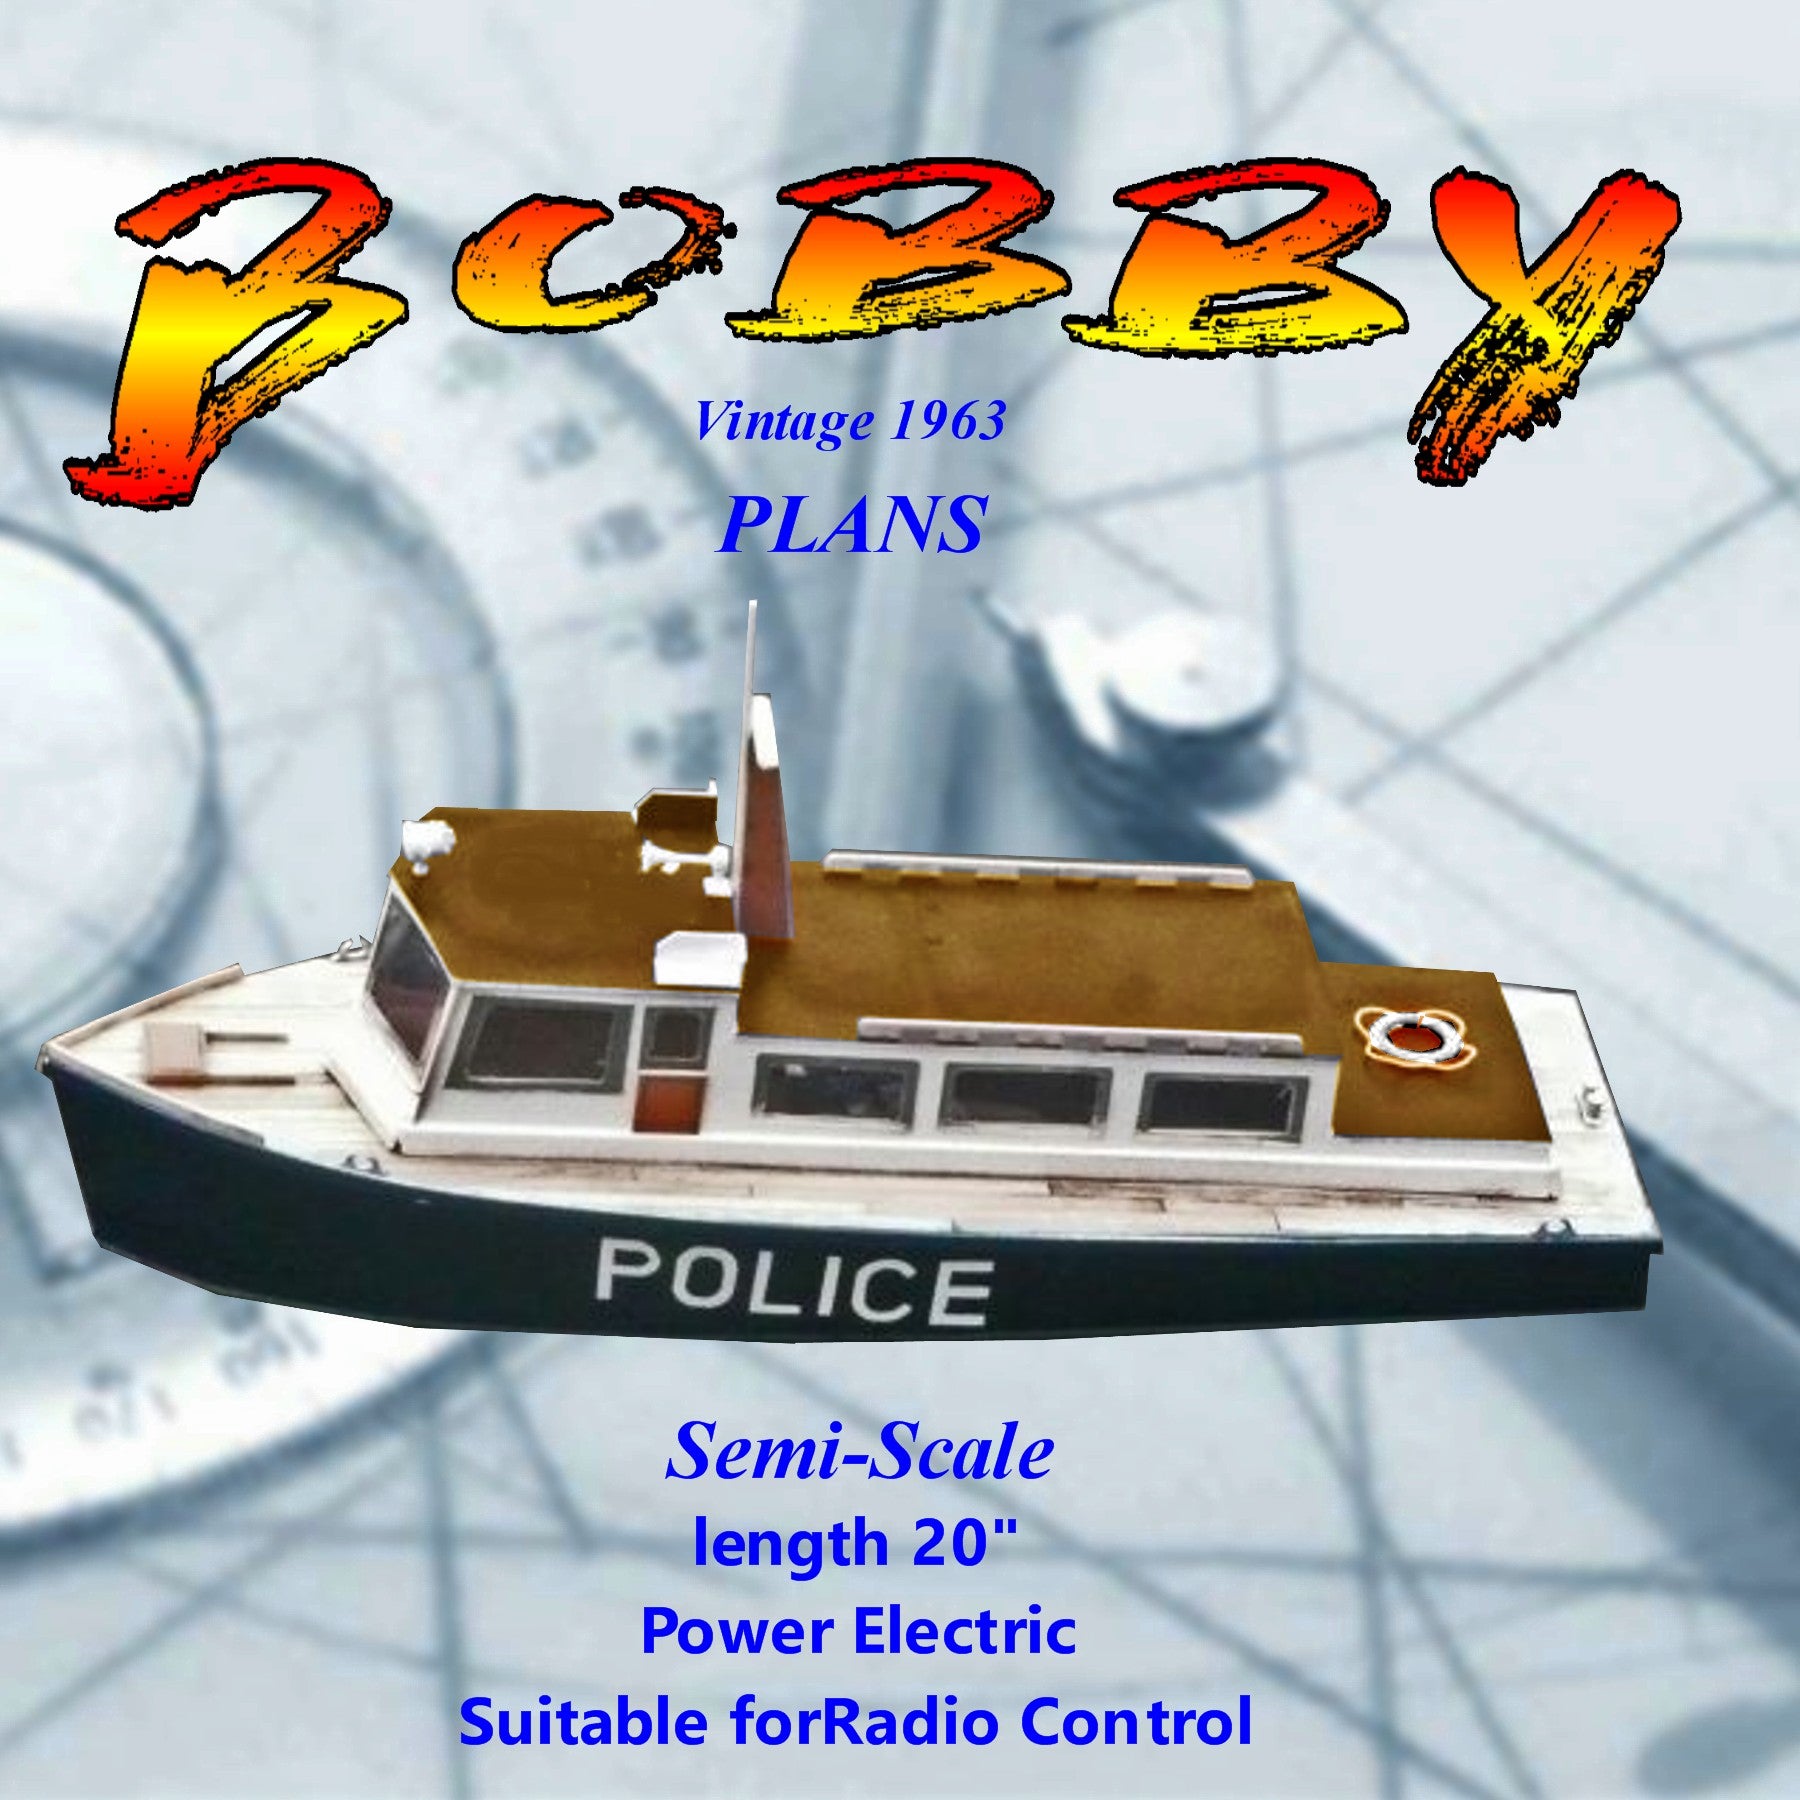 full size printed plans easy - to - build  20" model semi-scale police boat suitable for radio control